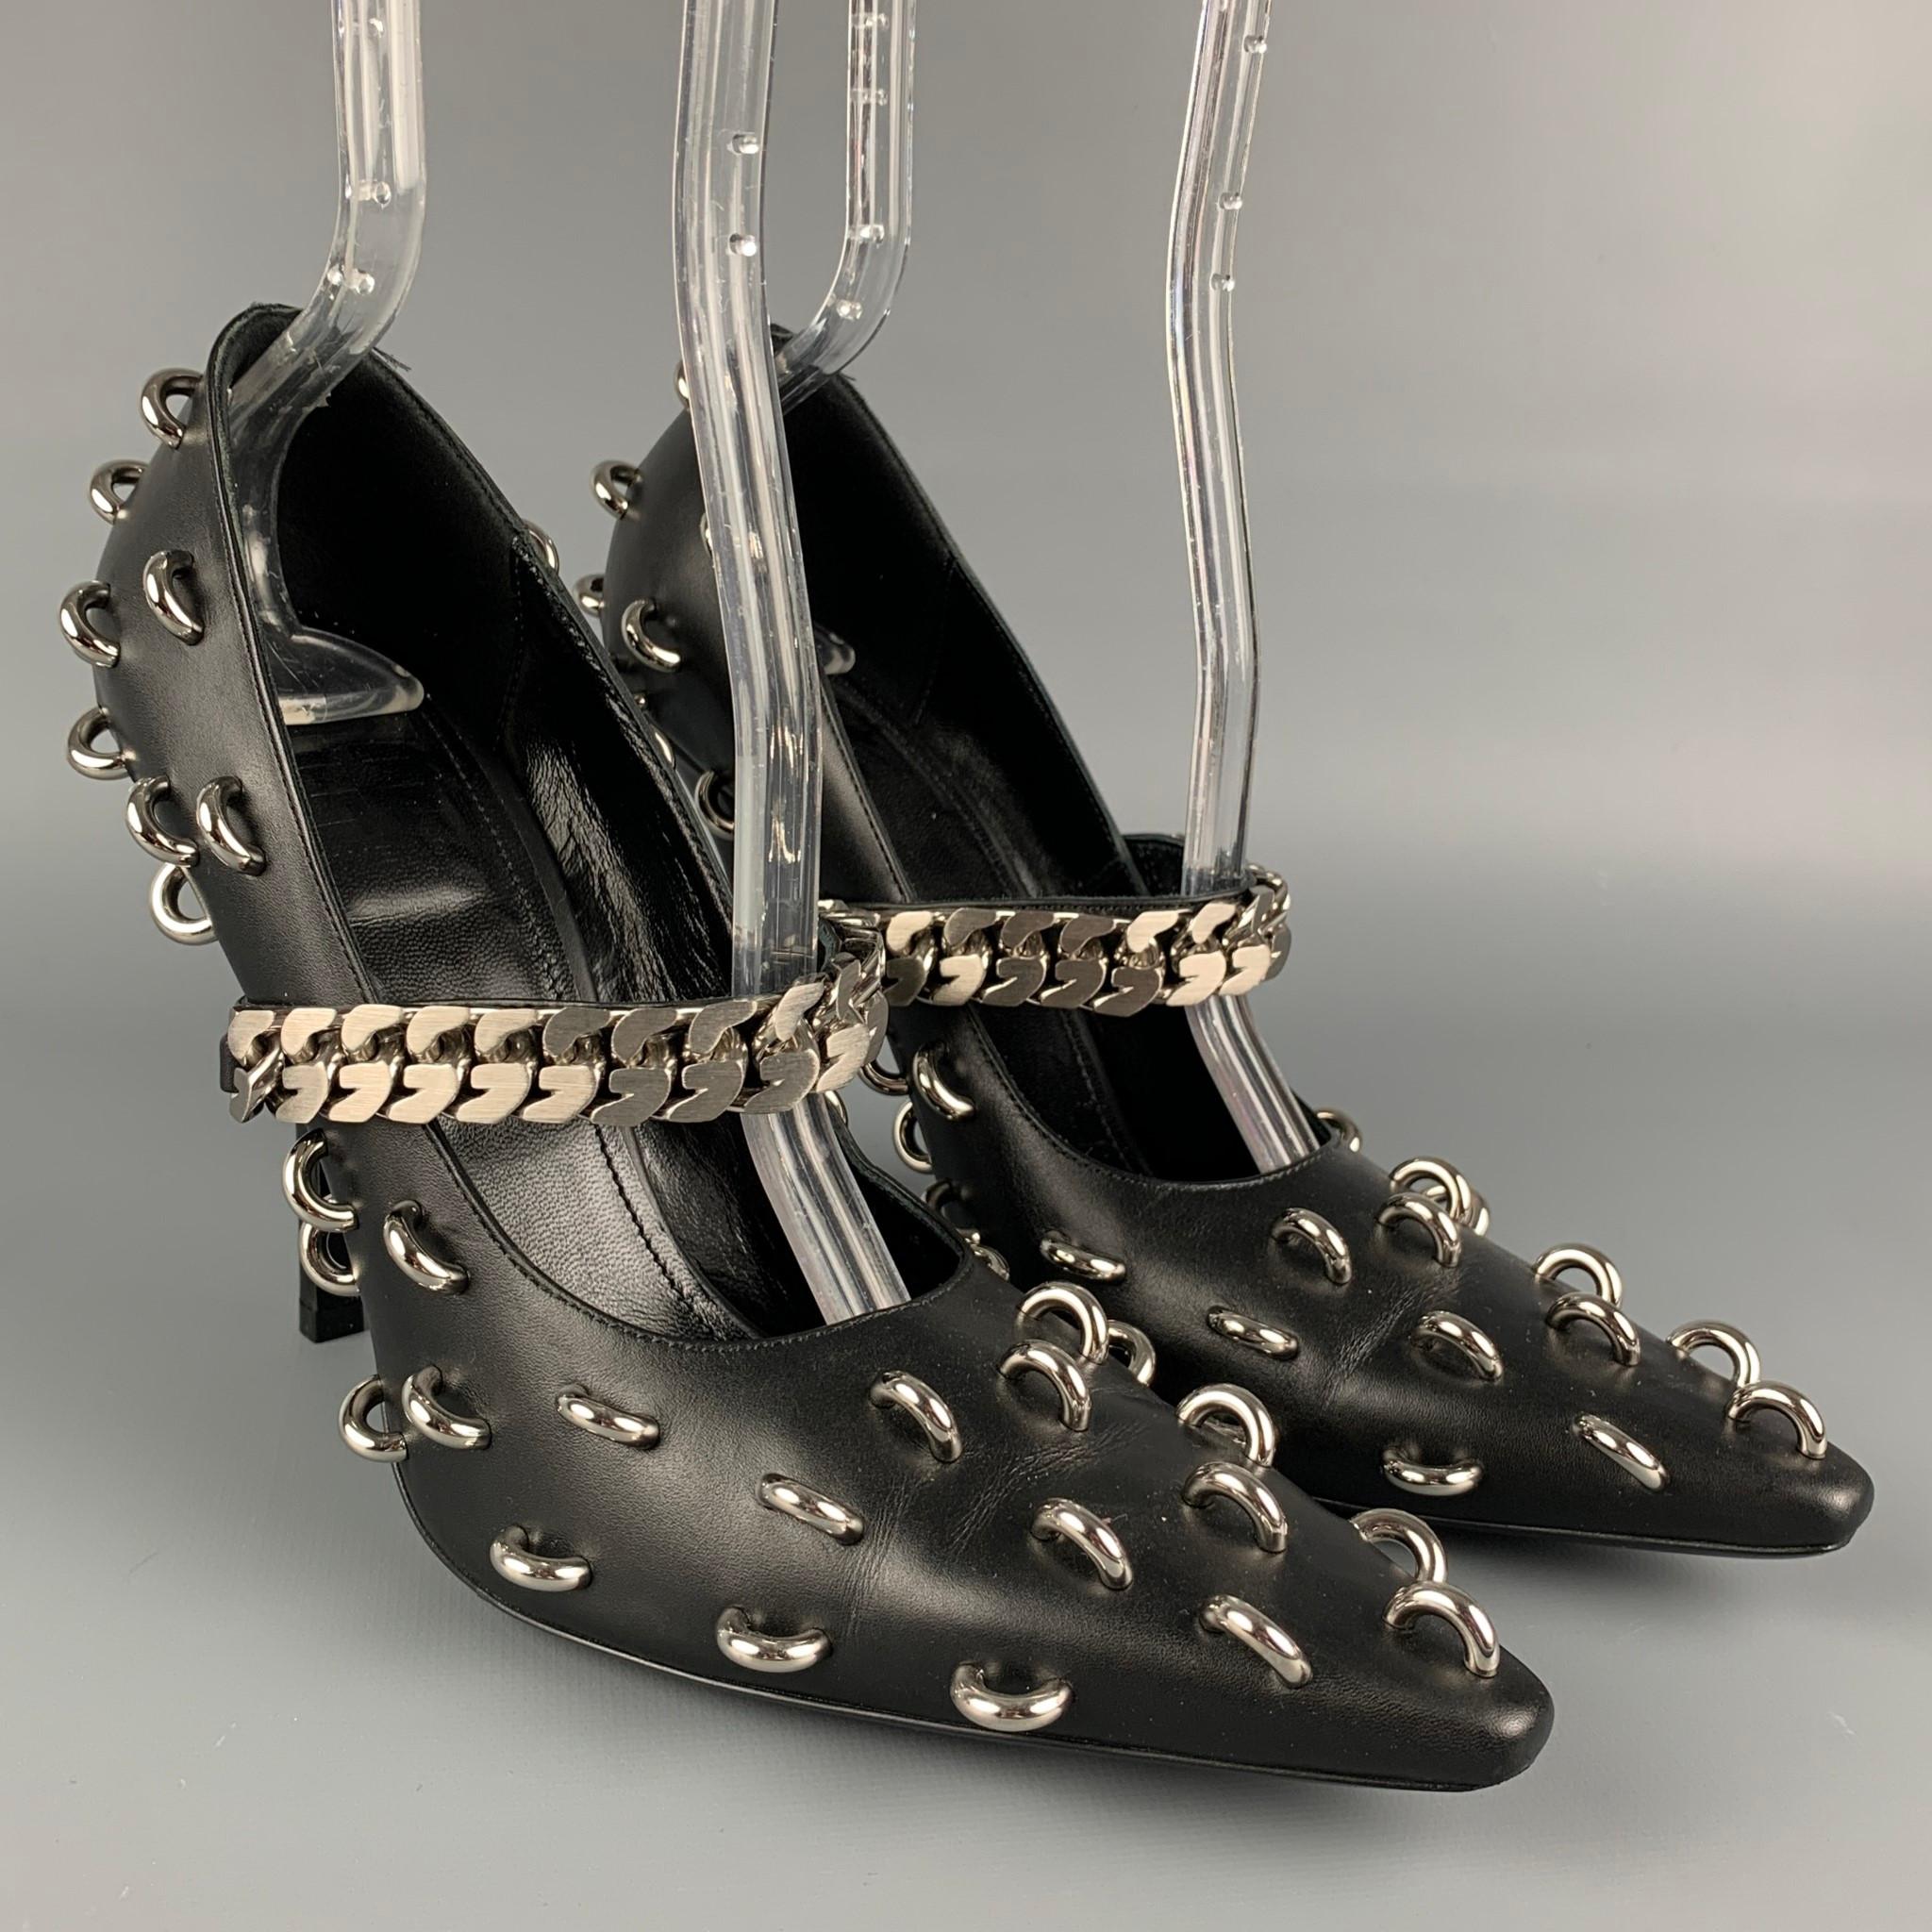 GIVENCHY pumps comes in a black leather with silver tone hardware featuring a mary jane style, front chain link design, and a stiletto heel. Made in Italy. 

Excellent Pre-Owned Condition.
Marked:  38
Original Retail Price: